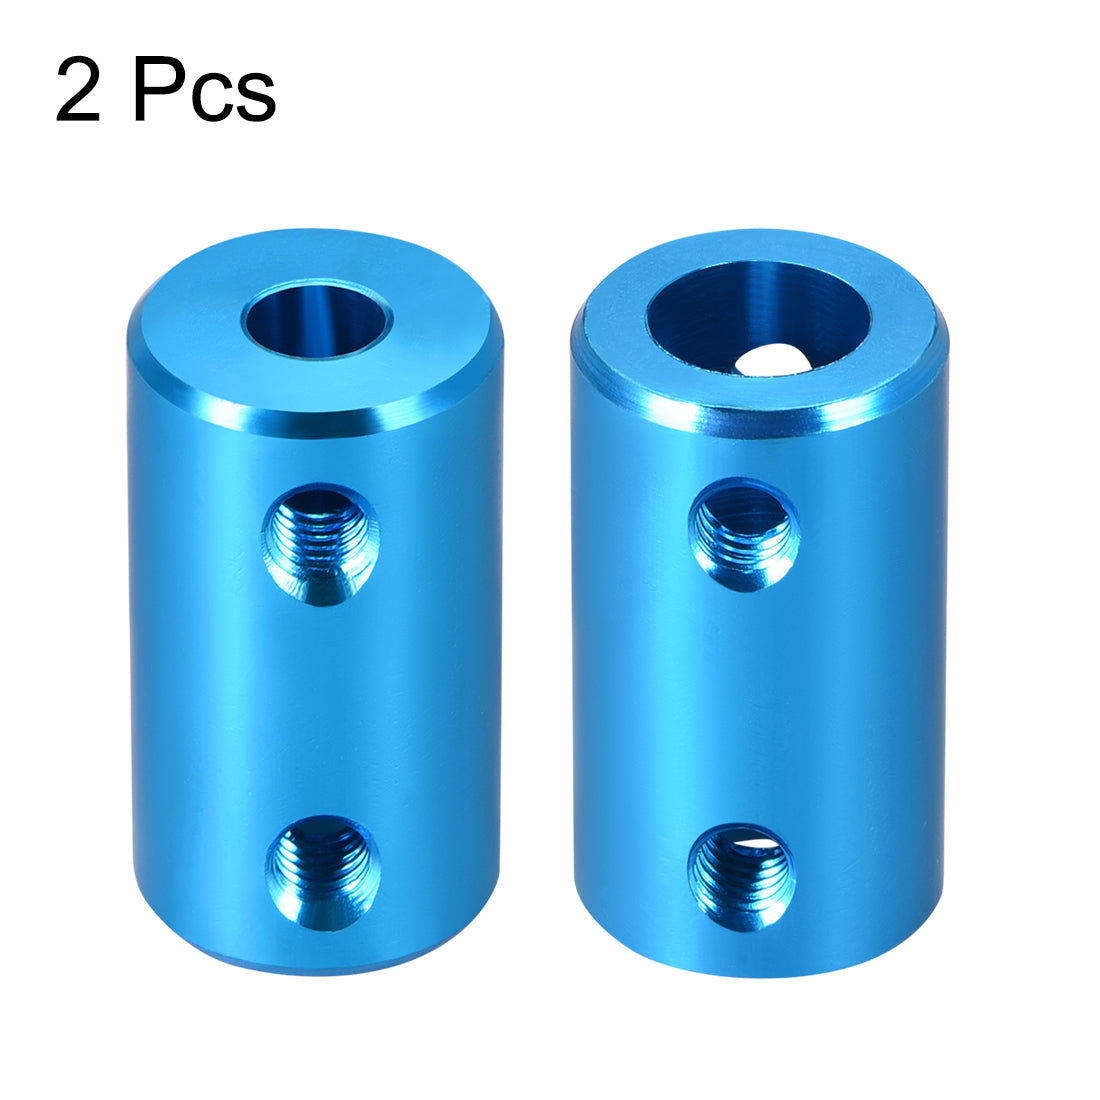 uxcell Uxcell Shaft Coupling 5mm to 8mm Bore L25xD14 Robot Motor Wheel Rigid Coupler Connector Blue 2 Pcs